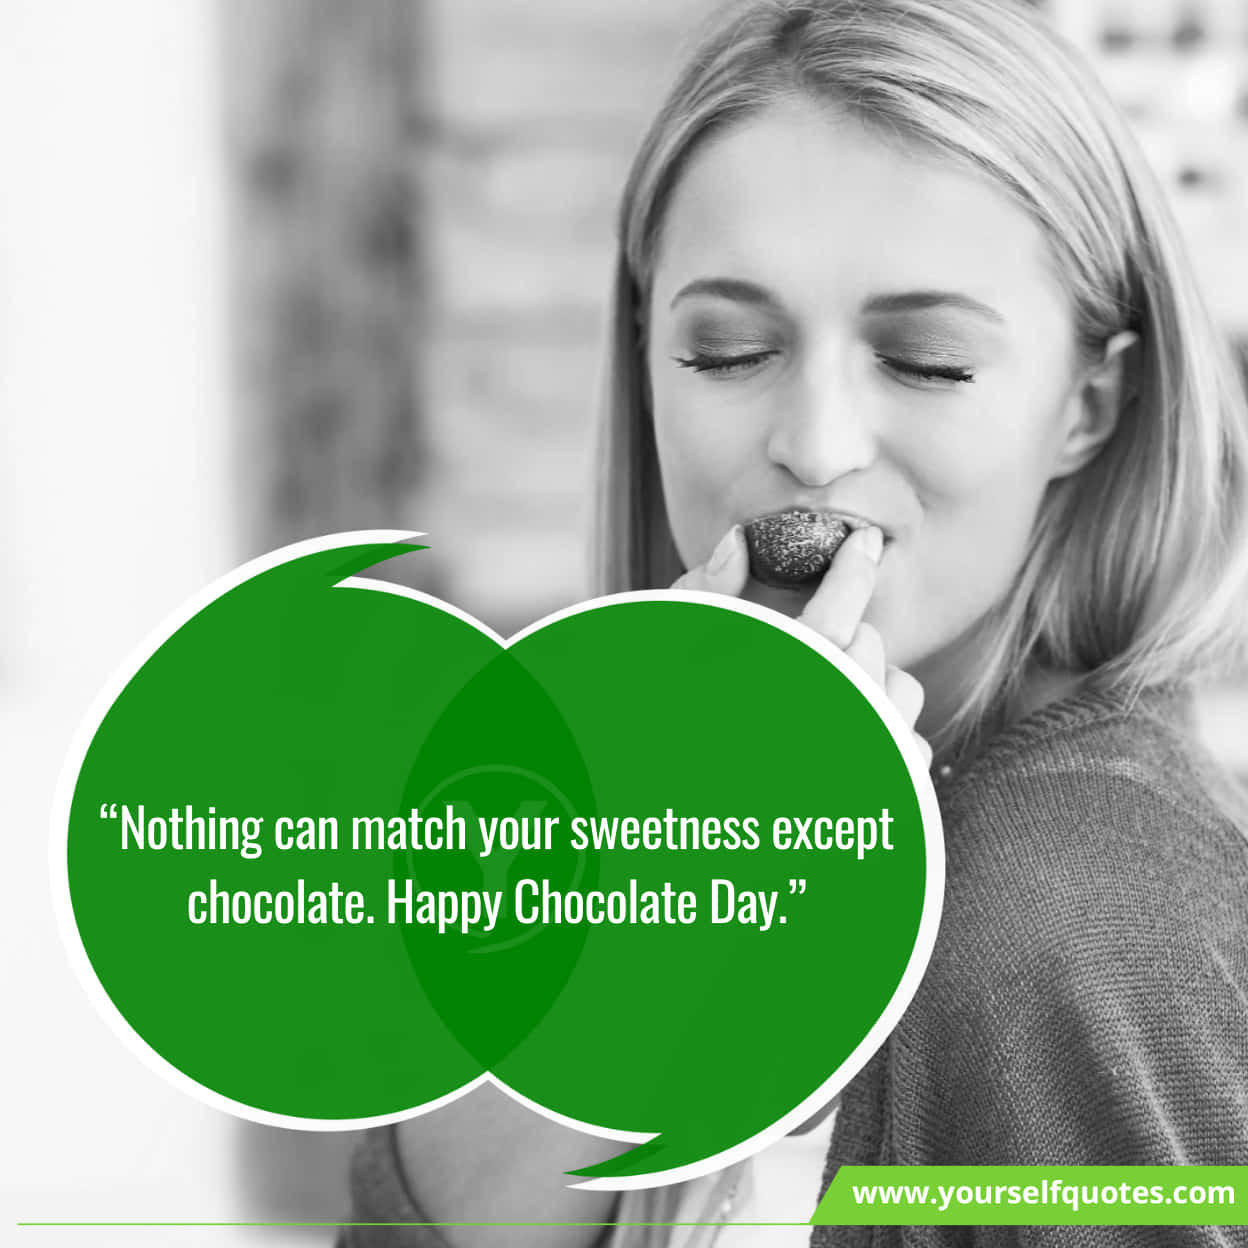 Chocolate Day Messages & Slogans